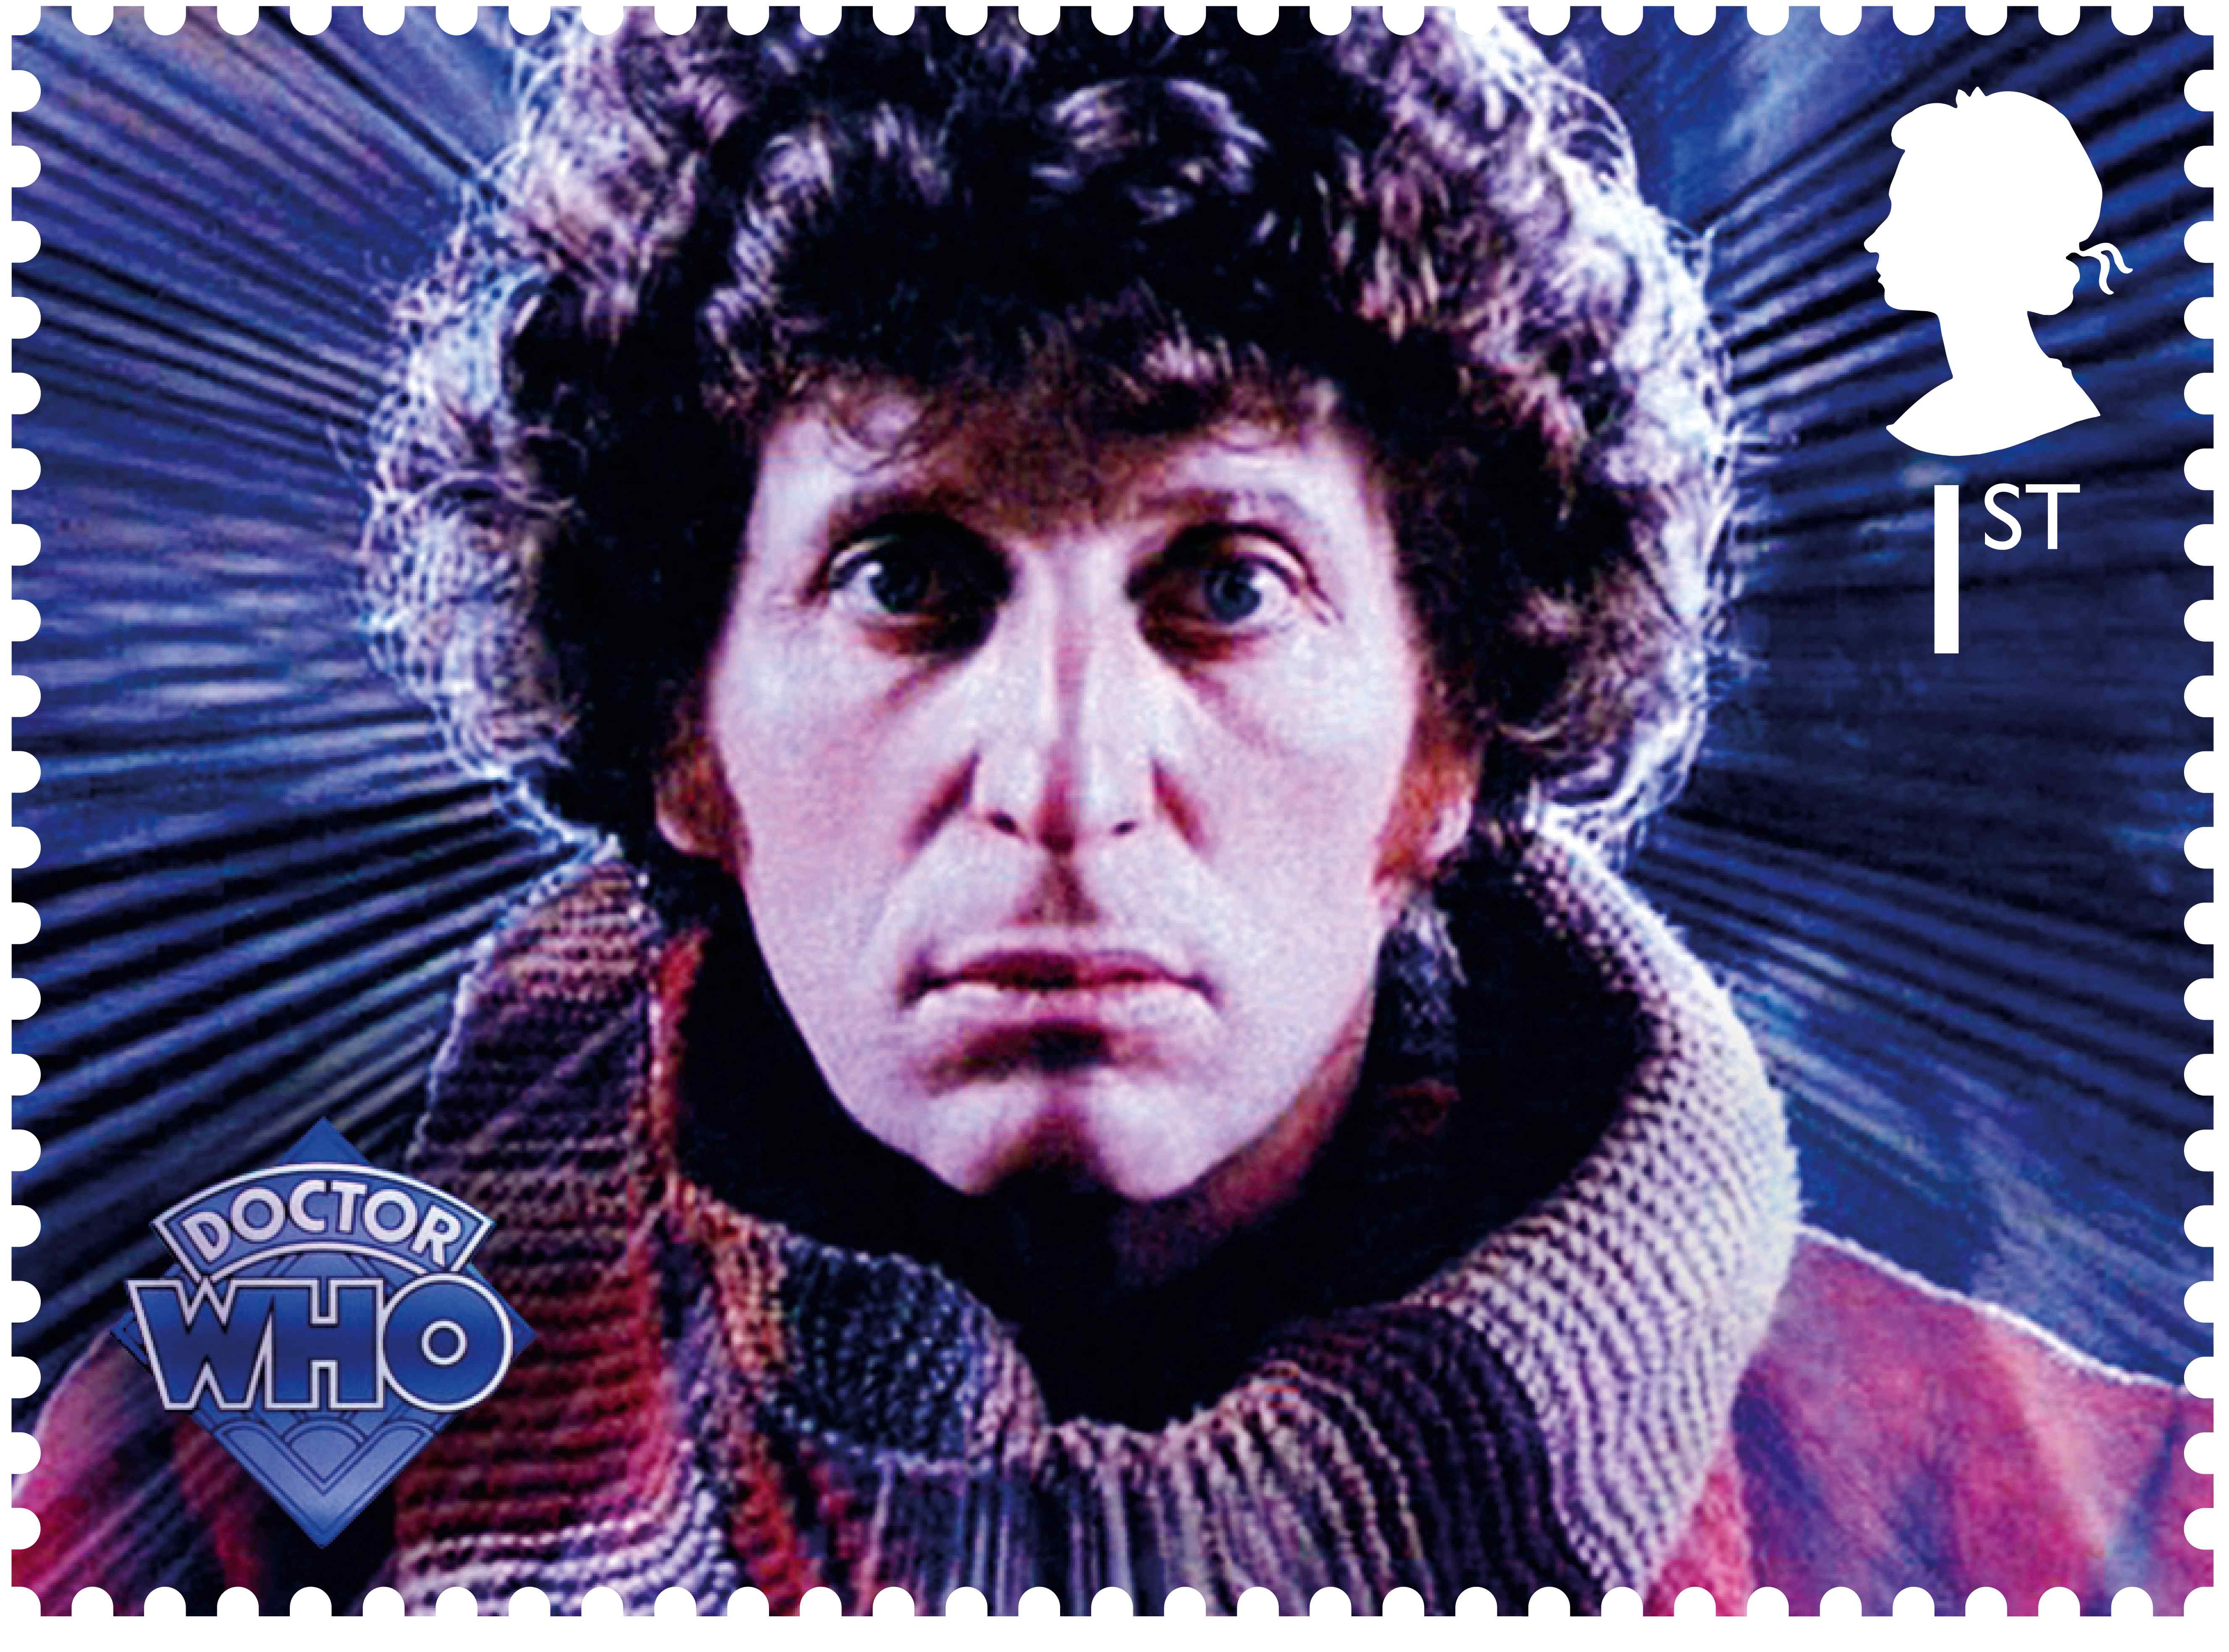 Tom Baker has starred in the most episodes